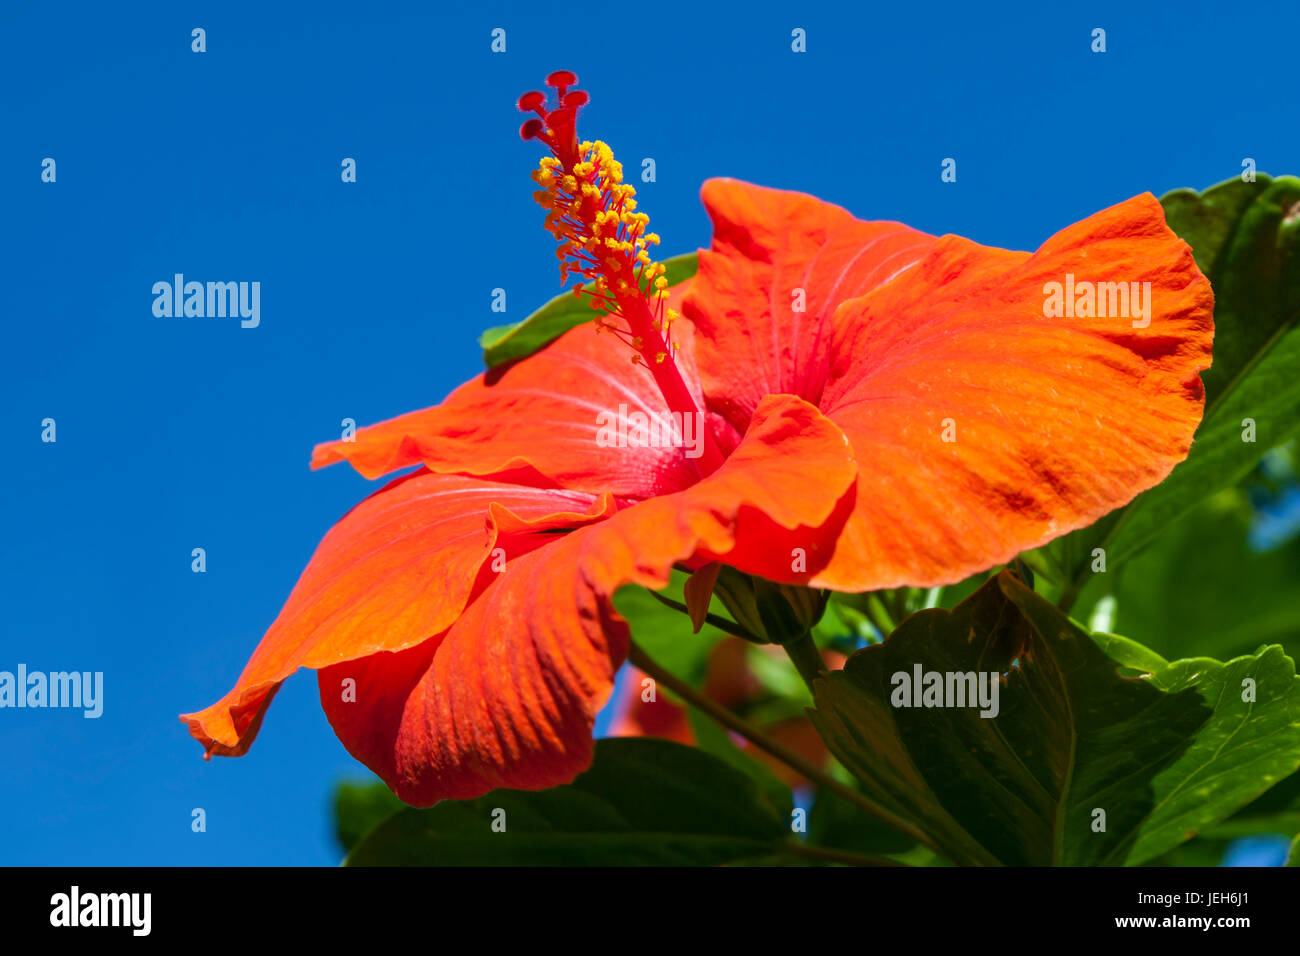 Close-up of red hibiscus flower et ciel bleu ; Maui, Hawaii, United States of America Banque D'Images